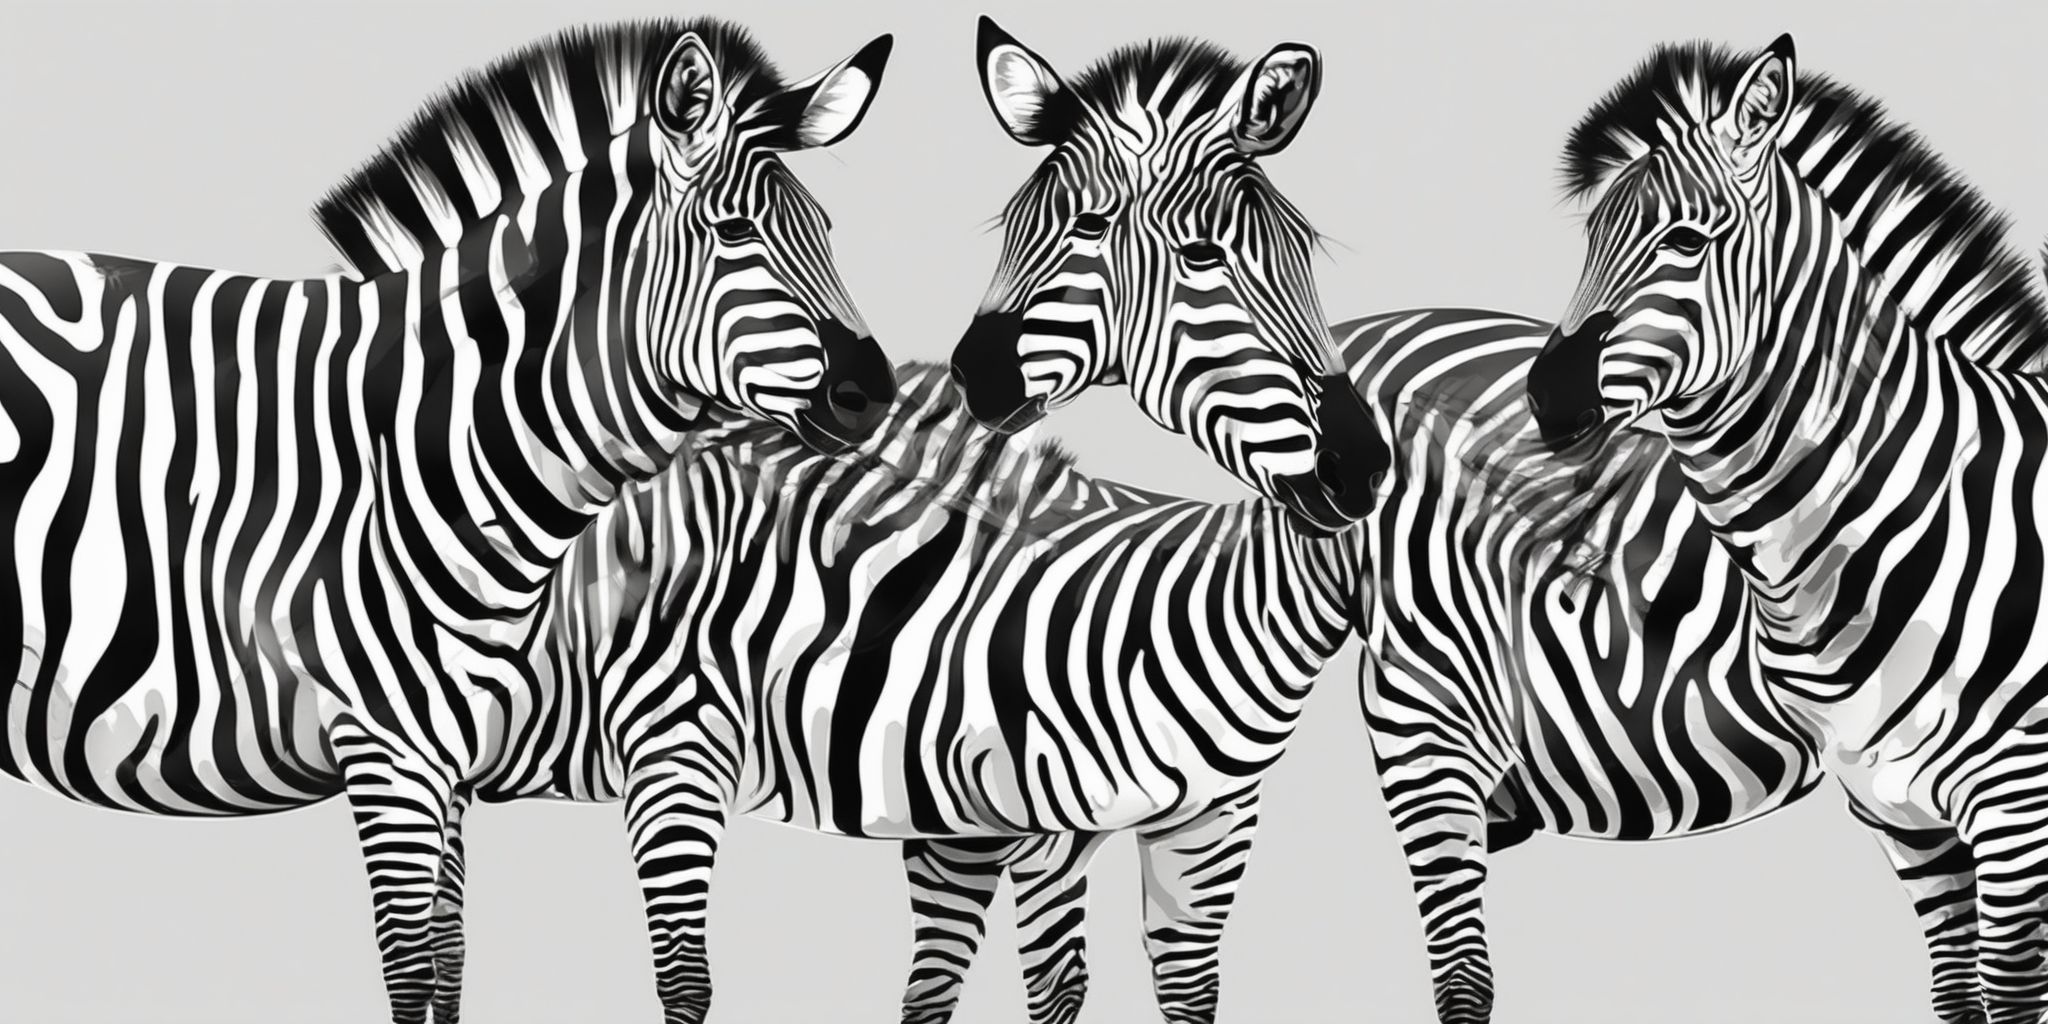 Zebra in illustration style with gradients and white background